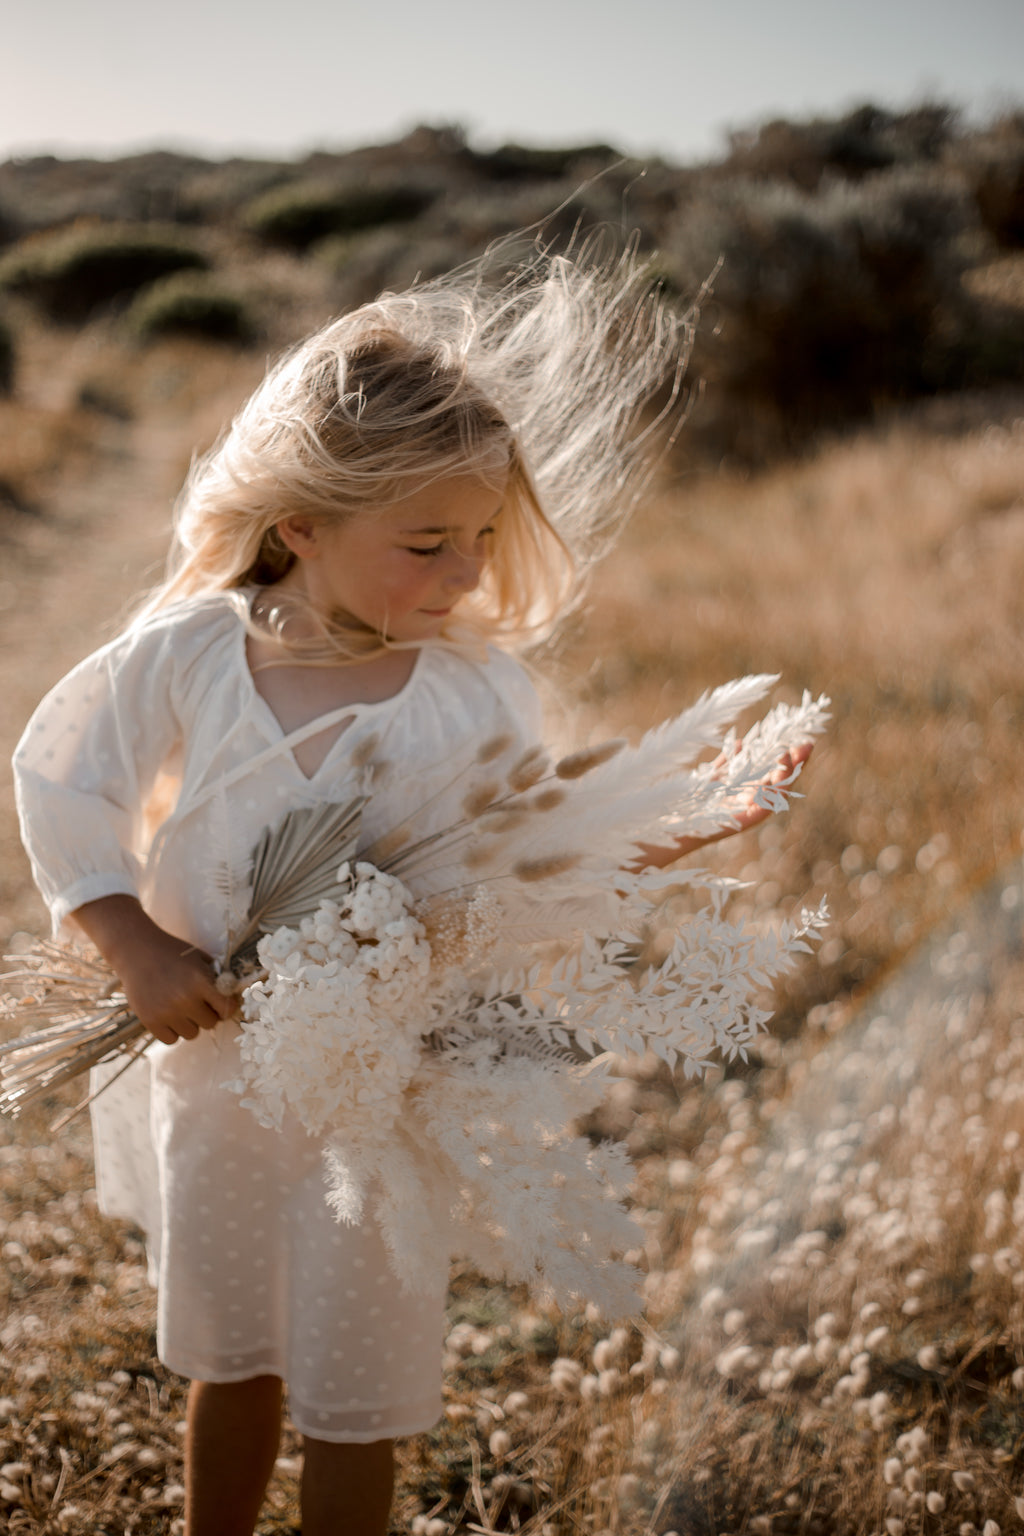 House of Paloma Freya Dress in Florè | 40% OFF | Size 4, 5 and 6 | Children of the Wild